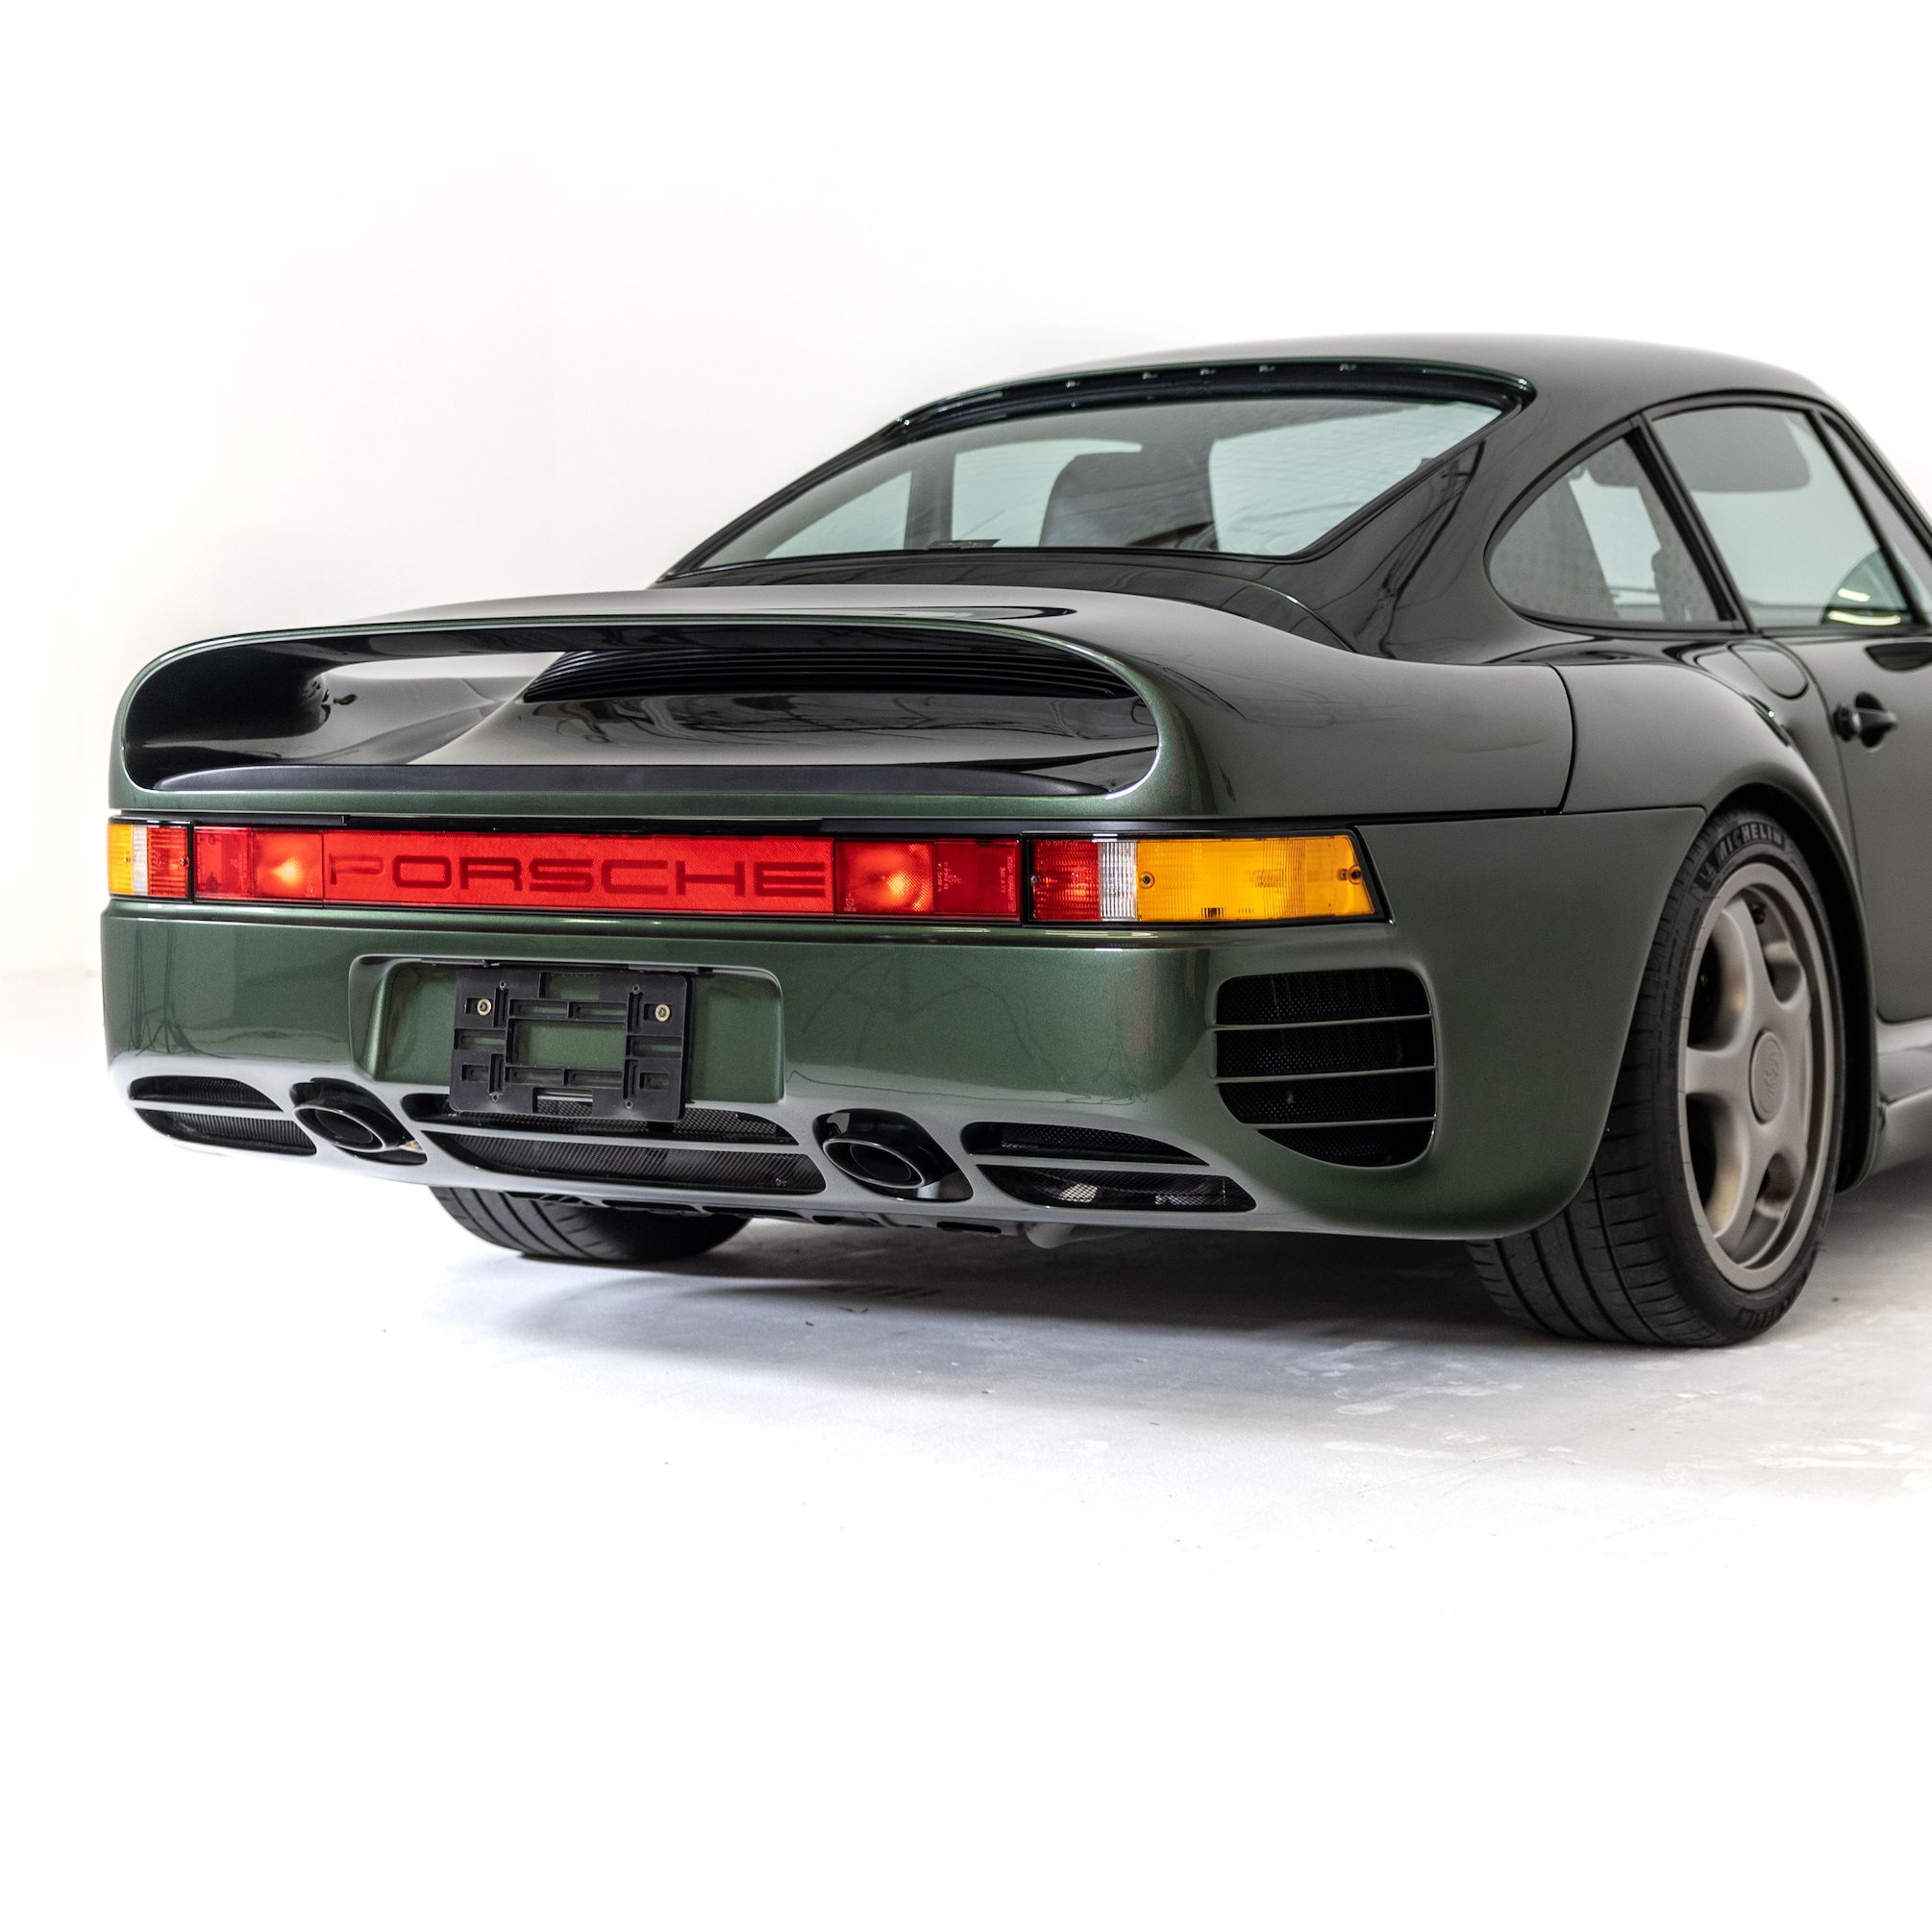 This Is the Porsche 959 Nissan Bought to Make the R32 GT-R